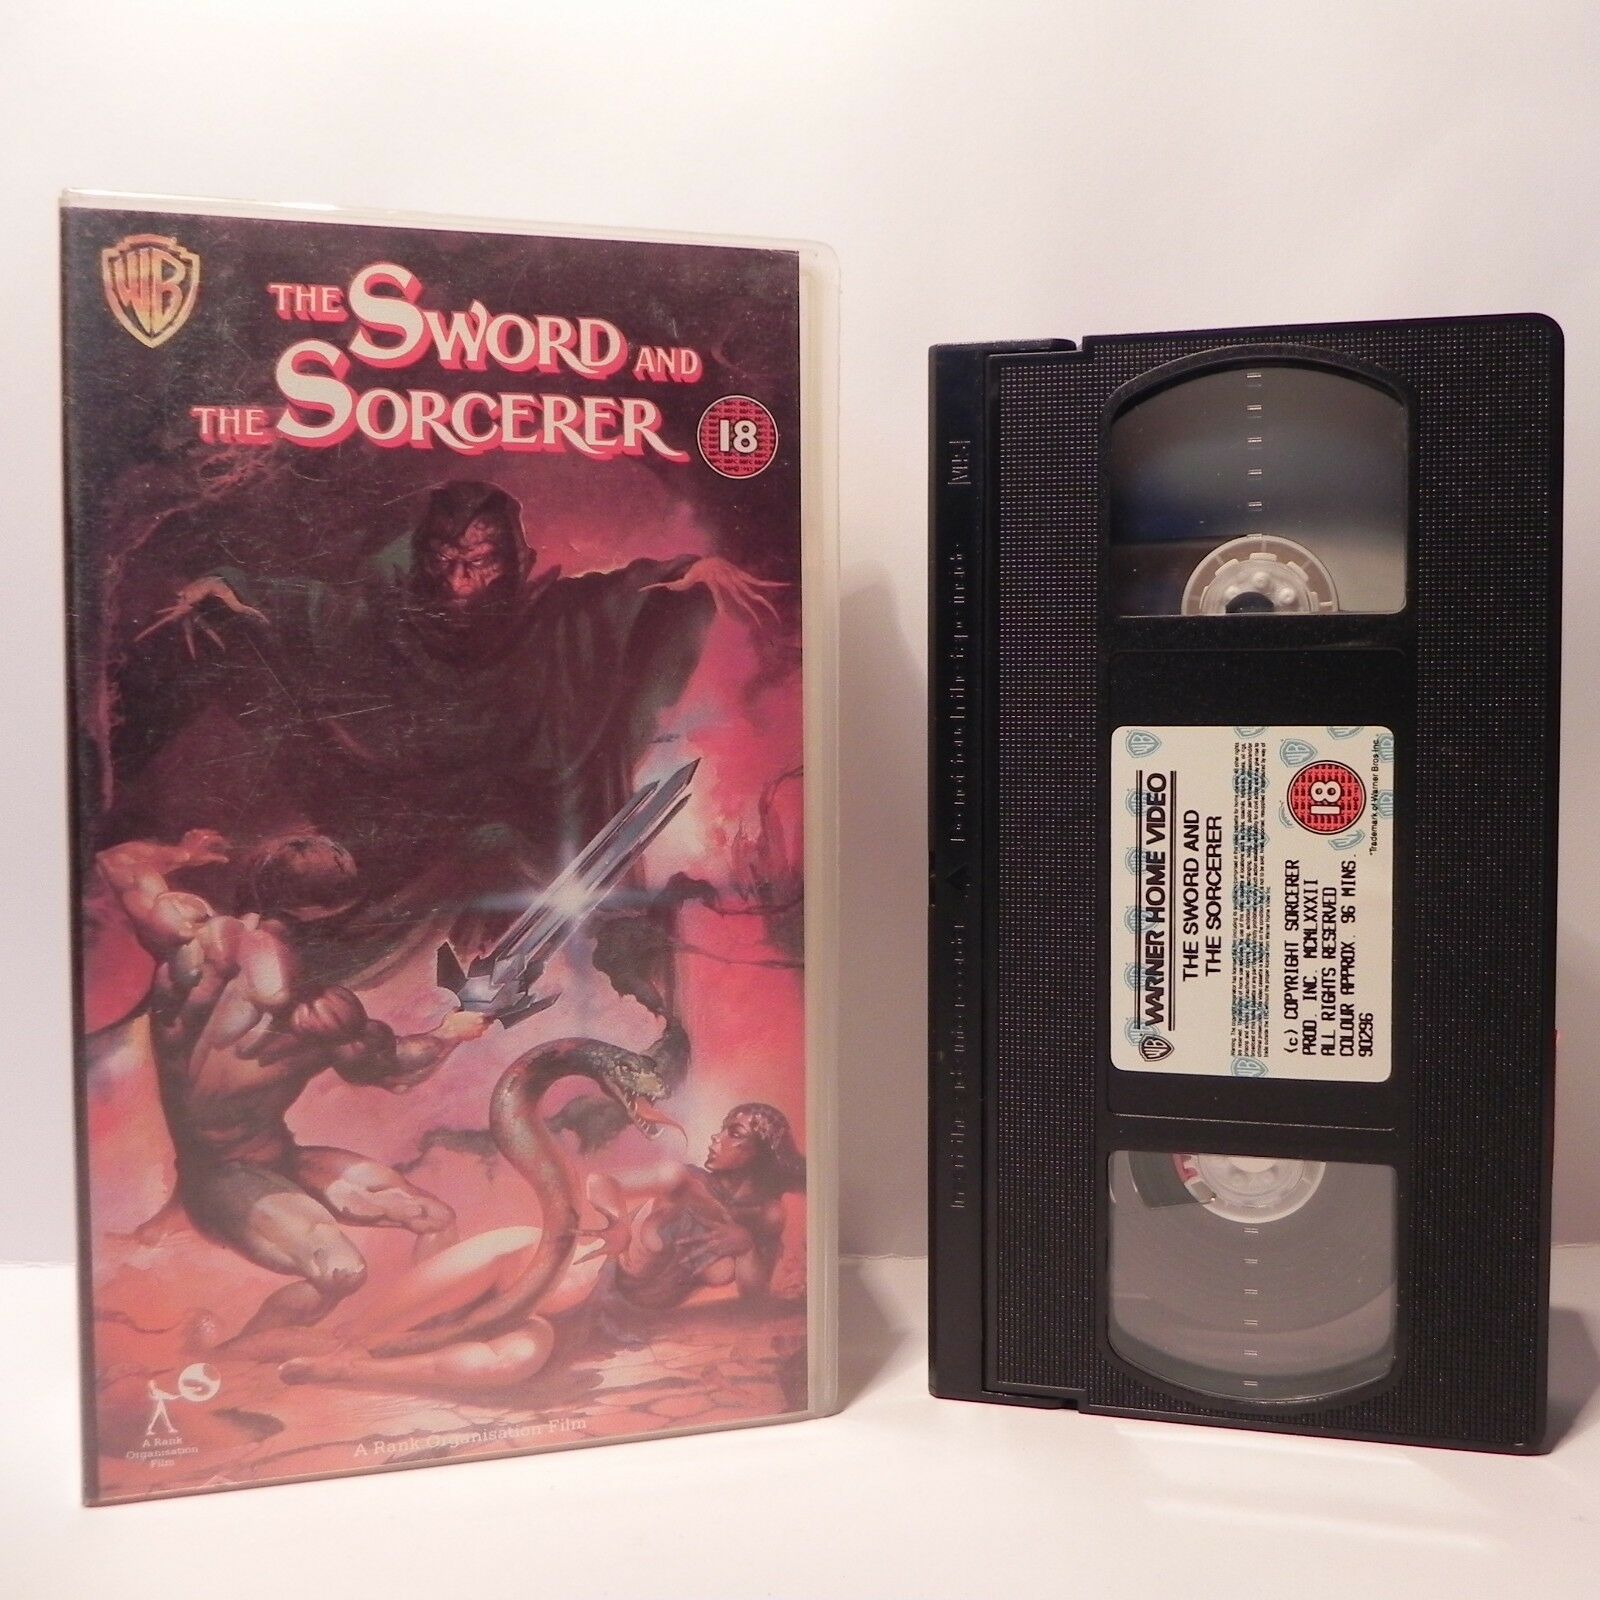 The Sword And The Sorcerer: 3-Bladed Swordplay - (1982) Medieval Fantasy - VHS-